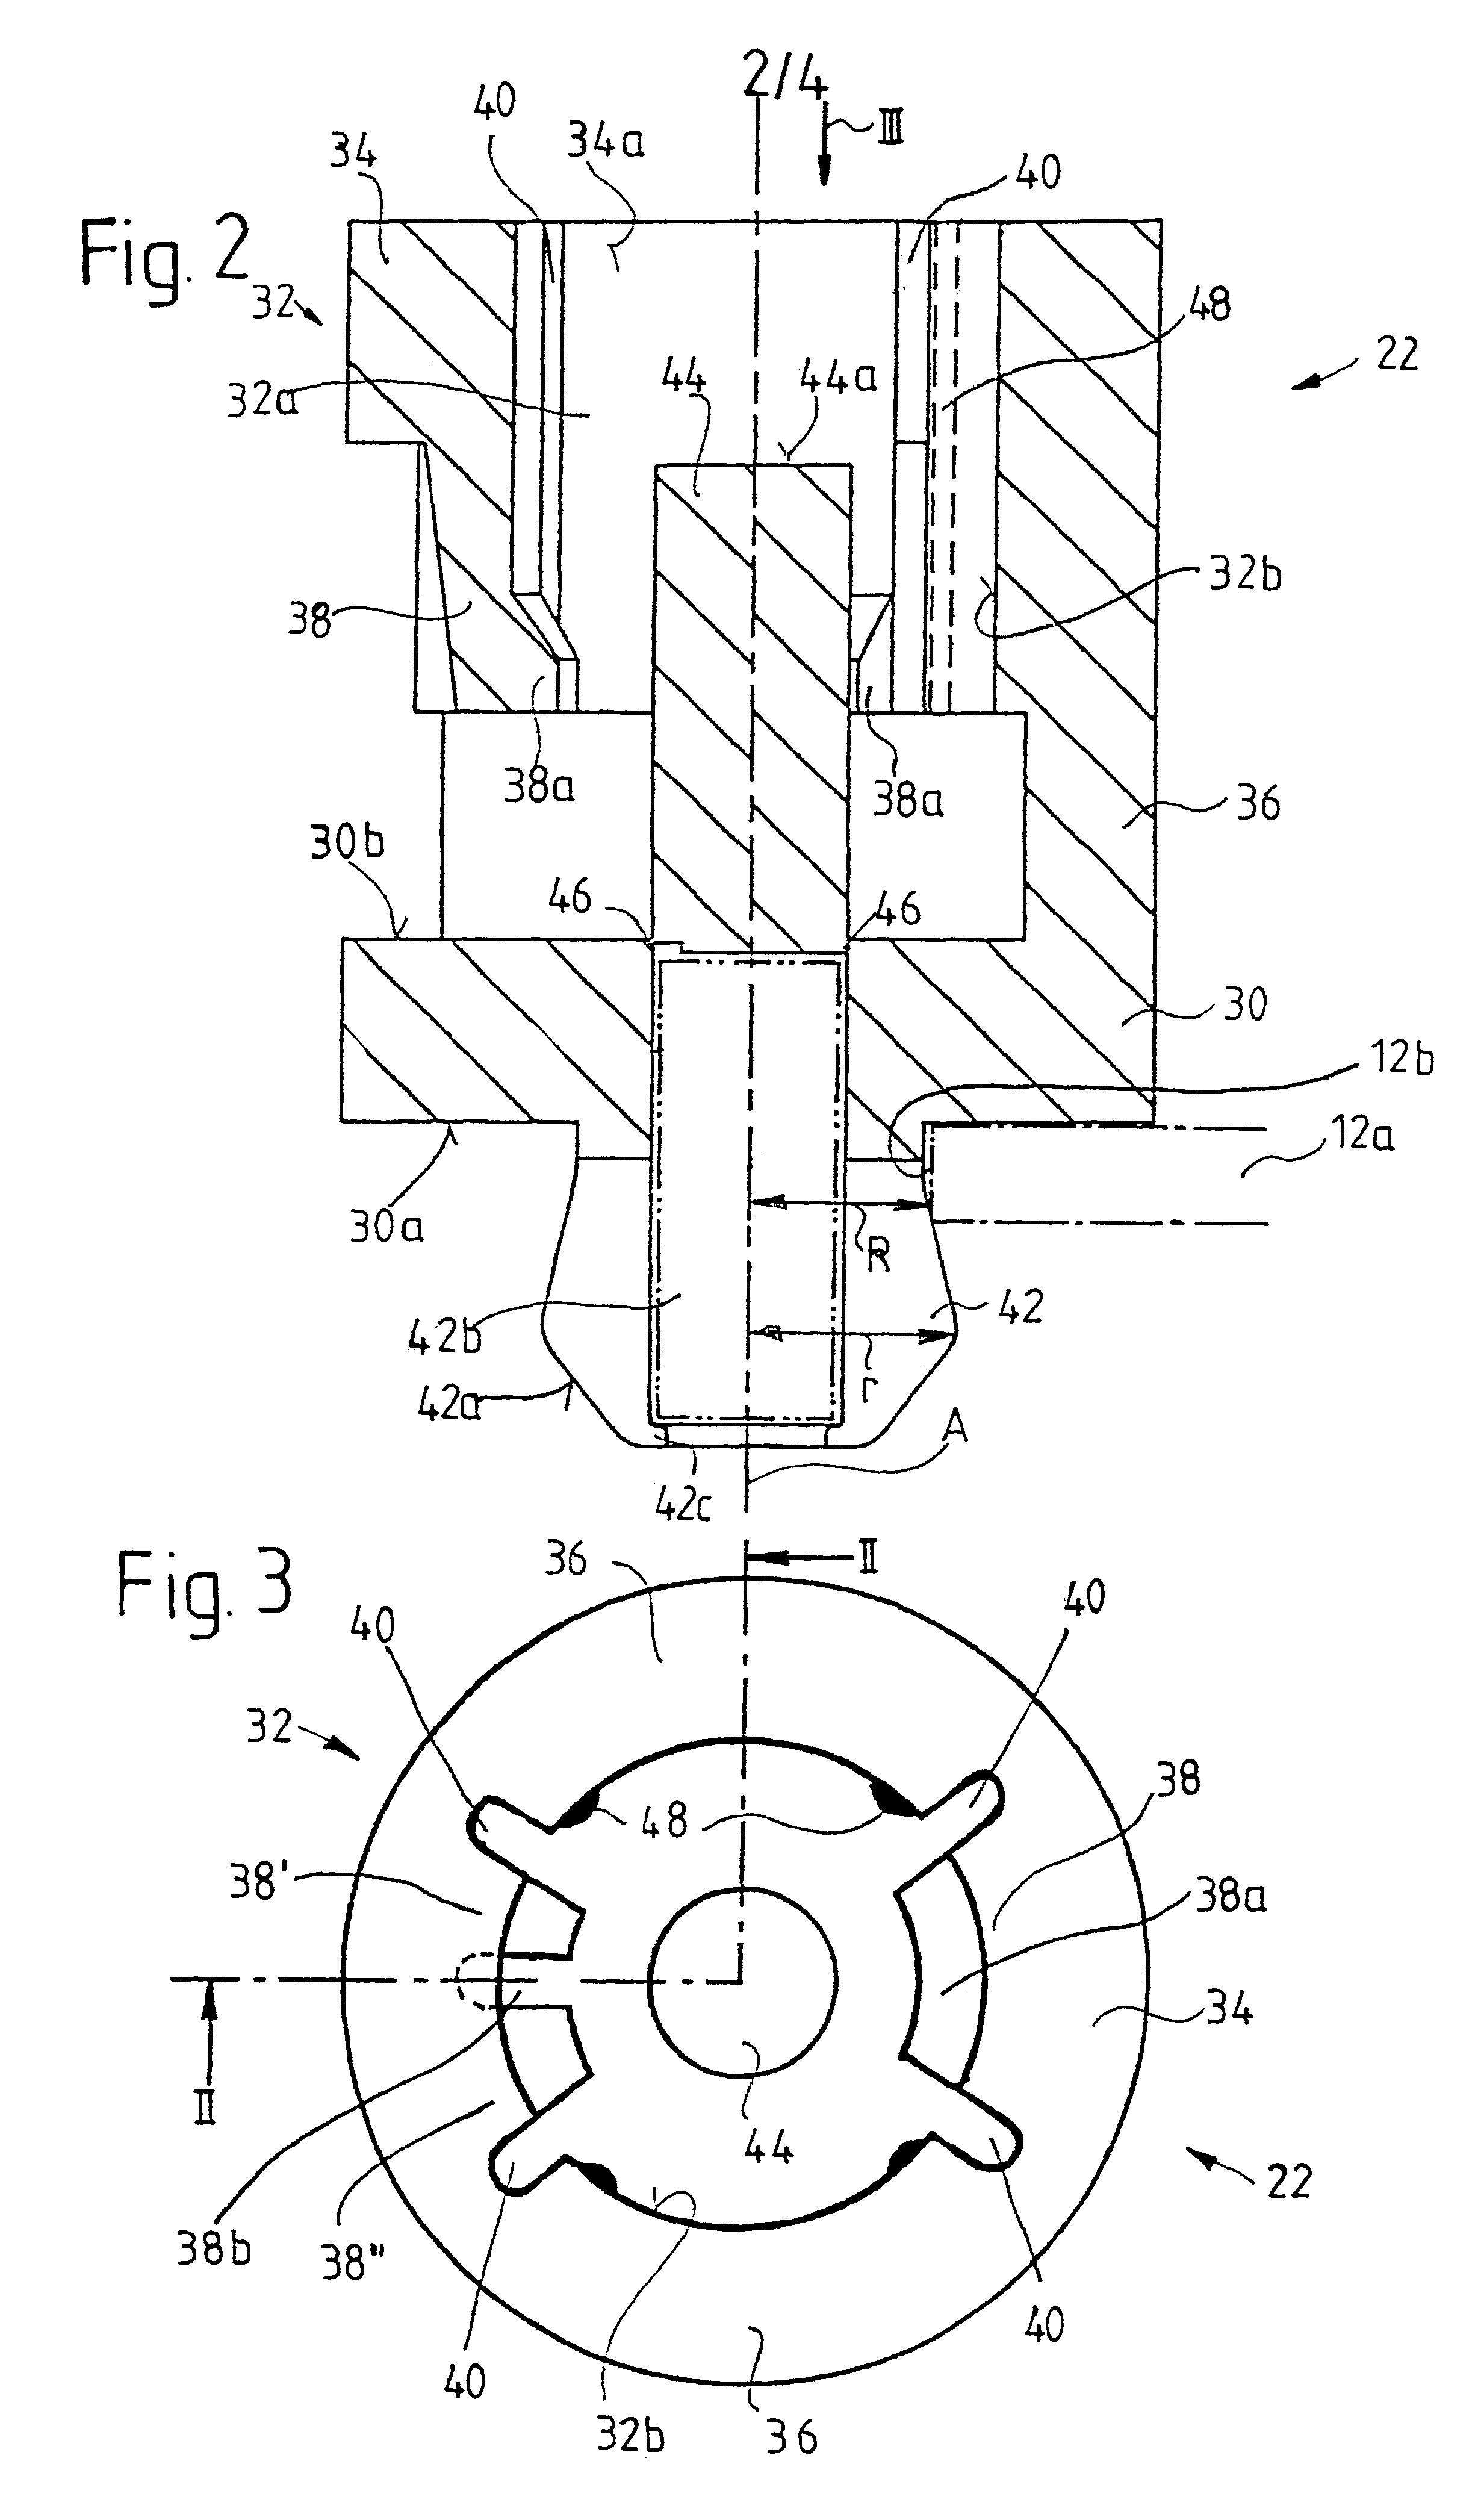 Length adjustable column with axial bearing, and method of installation of the axial bearing